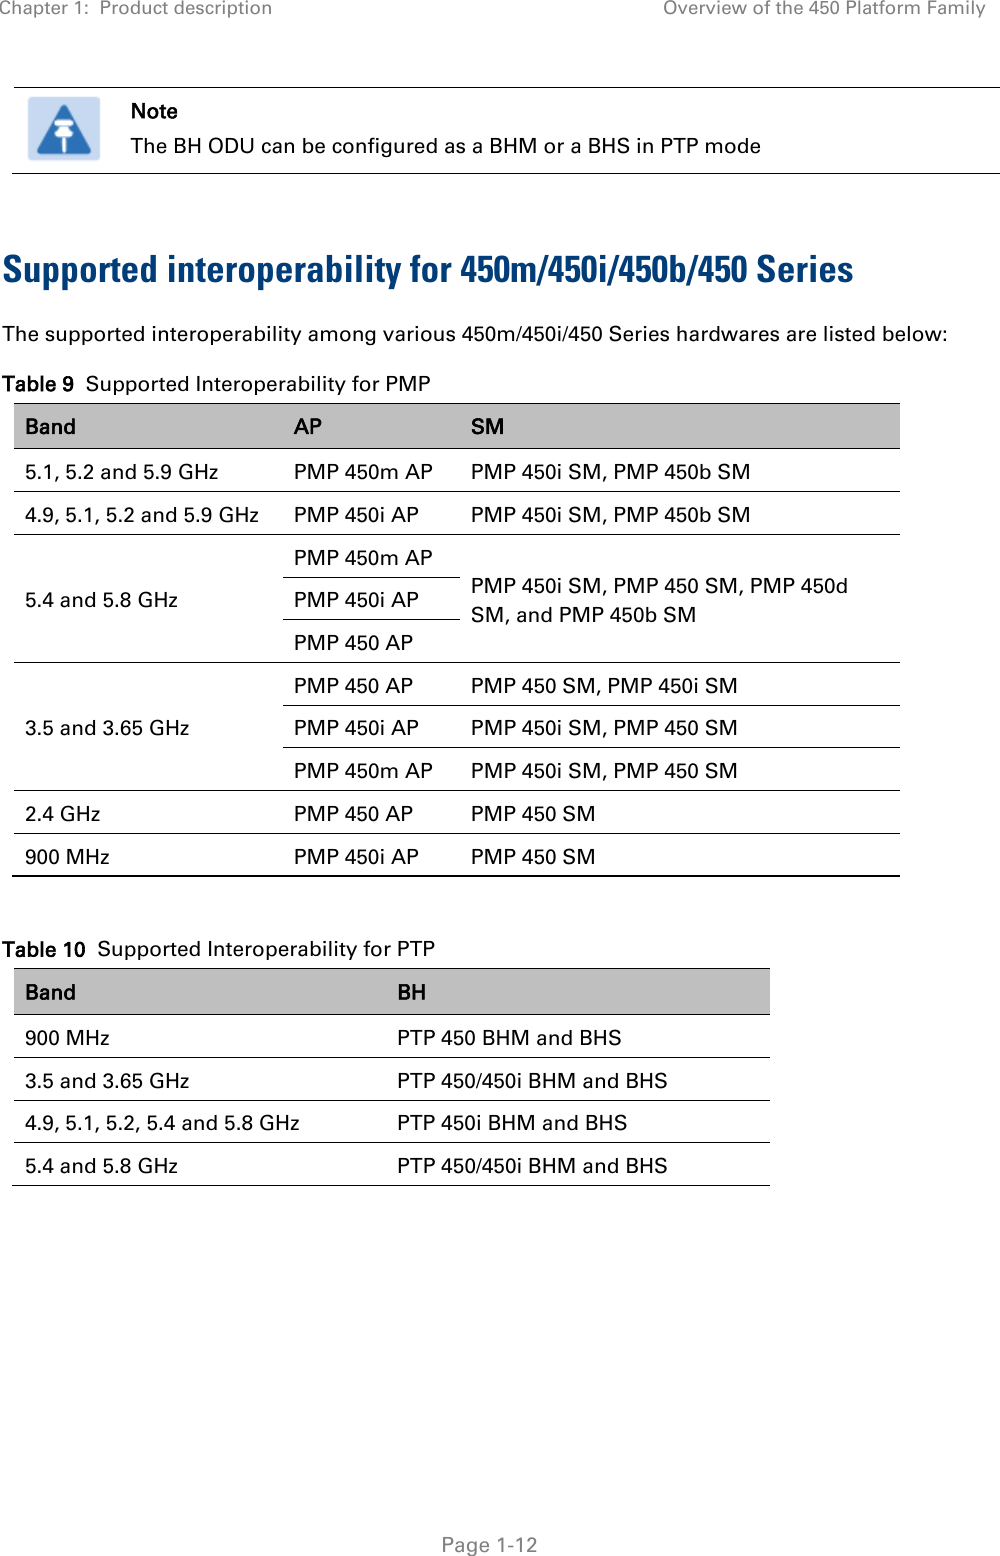 Chapter 1:  Product description Overview of the 450 Platform Family   Page 1-12  Note The BH ODU can be configured as a BHM or a BHS in PTP mode  Supported interoperability for 450m/450i/450b/450 Series  The supported interoperability among various 450m/450i/450 Series hardwares are listed below: Table 9  Supported Interoperability for PMP Band AP  SM 5.1, 5.2 and 5.9 GHz  PMP 450m AP PMP 450i SM, PMP 450b SM  4.9, 5.1, 5.2 and 5.9 GHz  PMP 450i AP PMP 450i SM, PMP 450b SM  5.4 and 5.8 GHz PMP 450m AP PMP 450i SM, PMP 450 SM, PMP 450d SM, and PMP 450b SM  PMP 450i AP PMP 450 AP 3.5 and 3.65 GHz PMP 450 AP PMP 450 SM, PMP 450i SM PMP 450i AP PMP 450i SM, PMP 450 SM PMP 450m AP PMP 450i SM, PMP 450 SM 2.4 GHz  PMP 450 AP PMP 450 SM 900 MHz PMP 450i AP PMP 450 SM  Table 10  Supported Interoperability for PTP Band BH 900 MHz PTP 450 BHM and BHS 3.5 and 3.65 GHz PTP 450/450i BHM and BHS 4.9, 5.1, 5.2, 5.4 and 5.8 GHz  PTP 450i BHM and BHS 5.4 and 5.8 GHz  PTP 450/450i BHM and BHS     